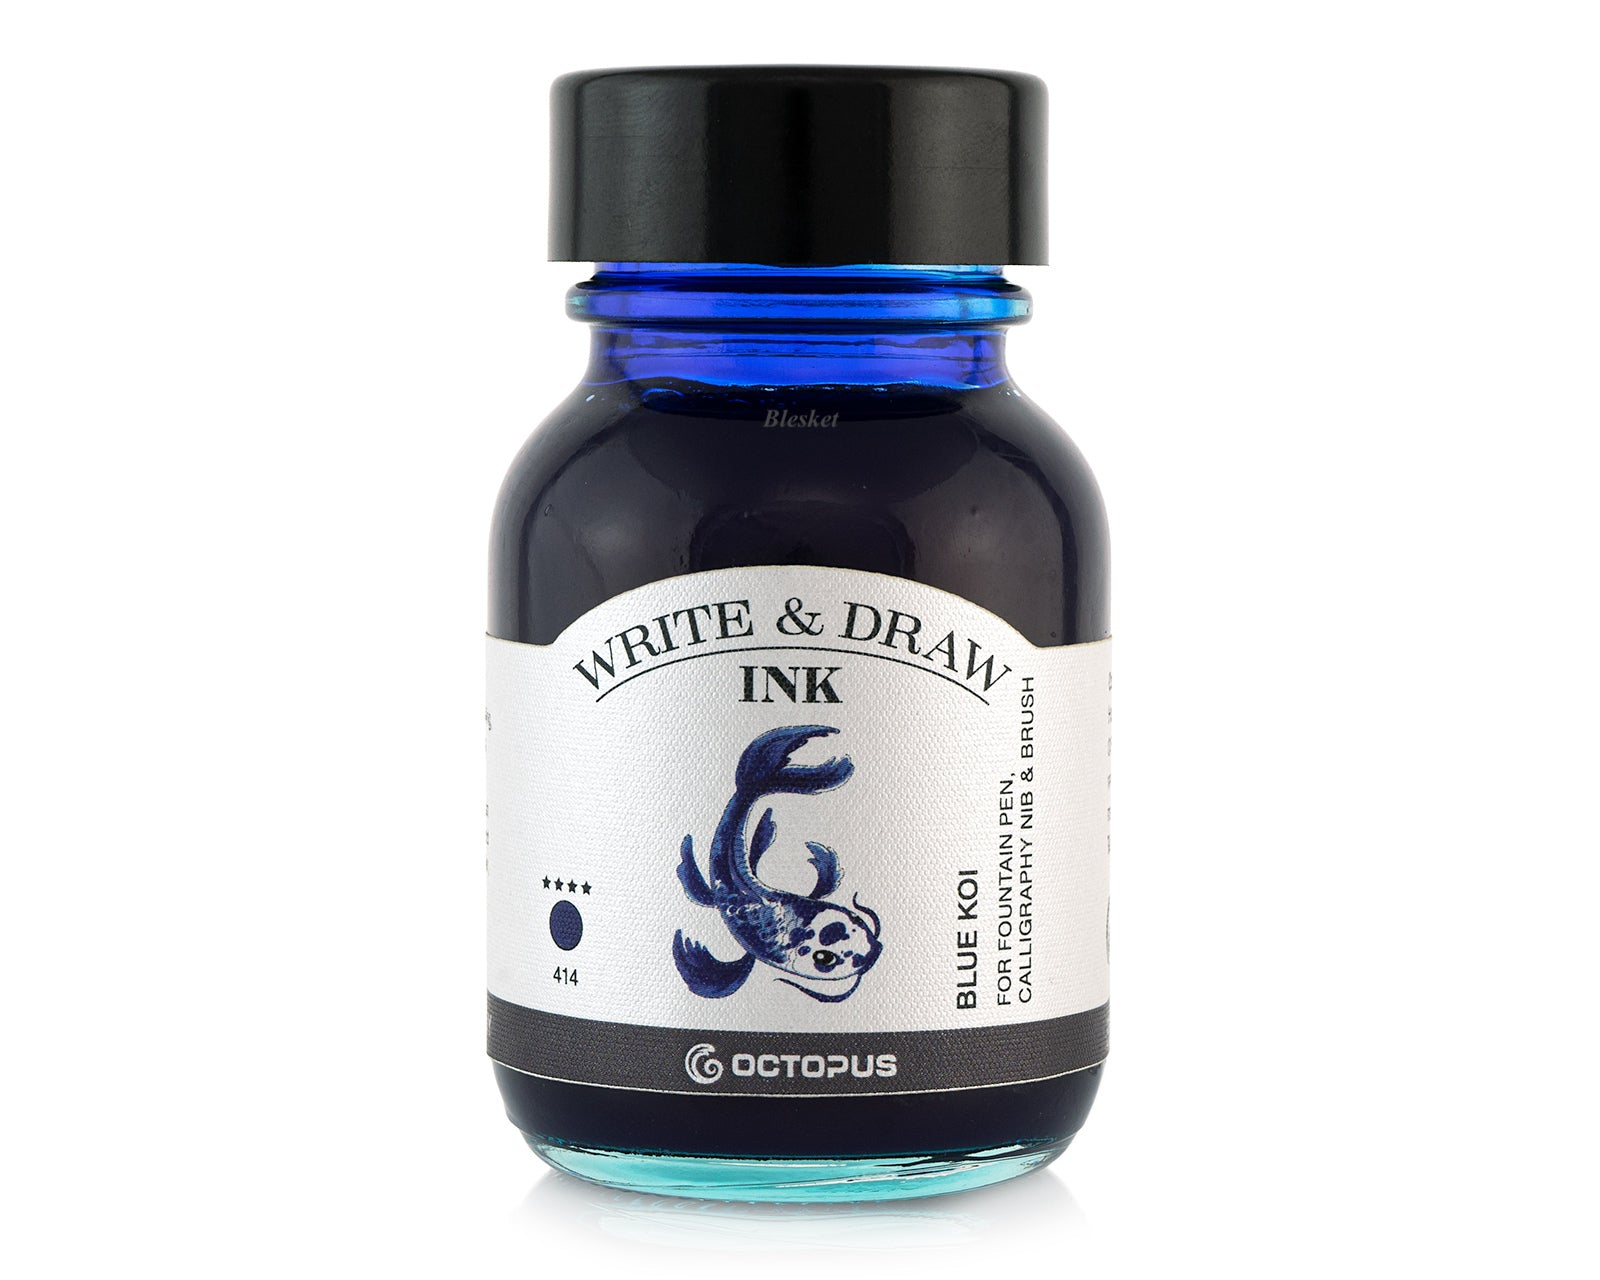 Octopus Write & Draw ink 50ml - Blue Koi - Blesket Canada